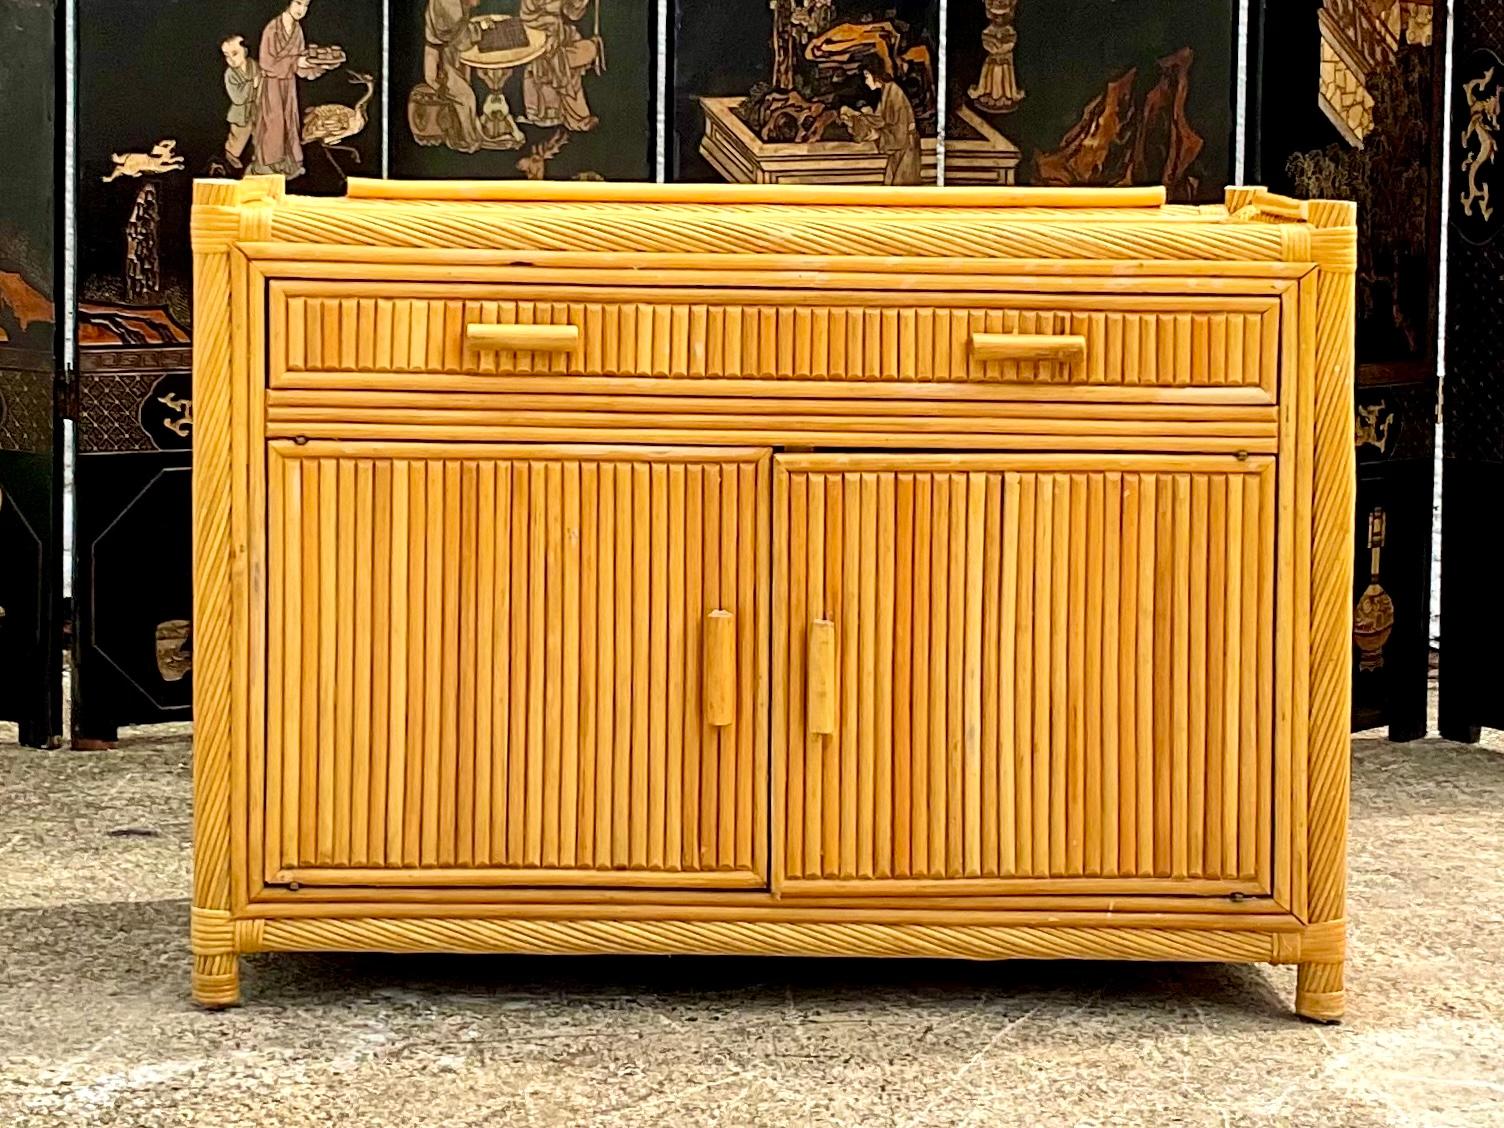 Fantastic vintage Coastal rattan credenza. A chic twisted rattan frame with inset rattan panel. Guard rails on top also make it great as a side board. Make it your own Island bar. Acquired from a Palm Beach estate.